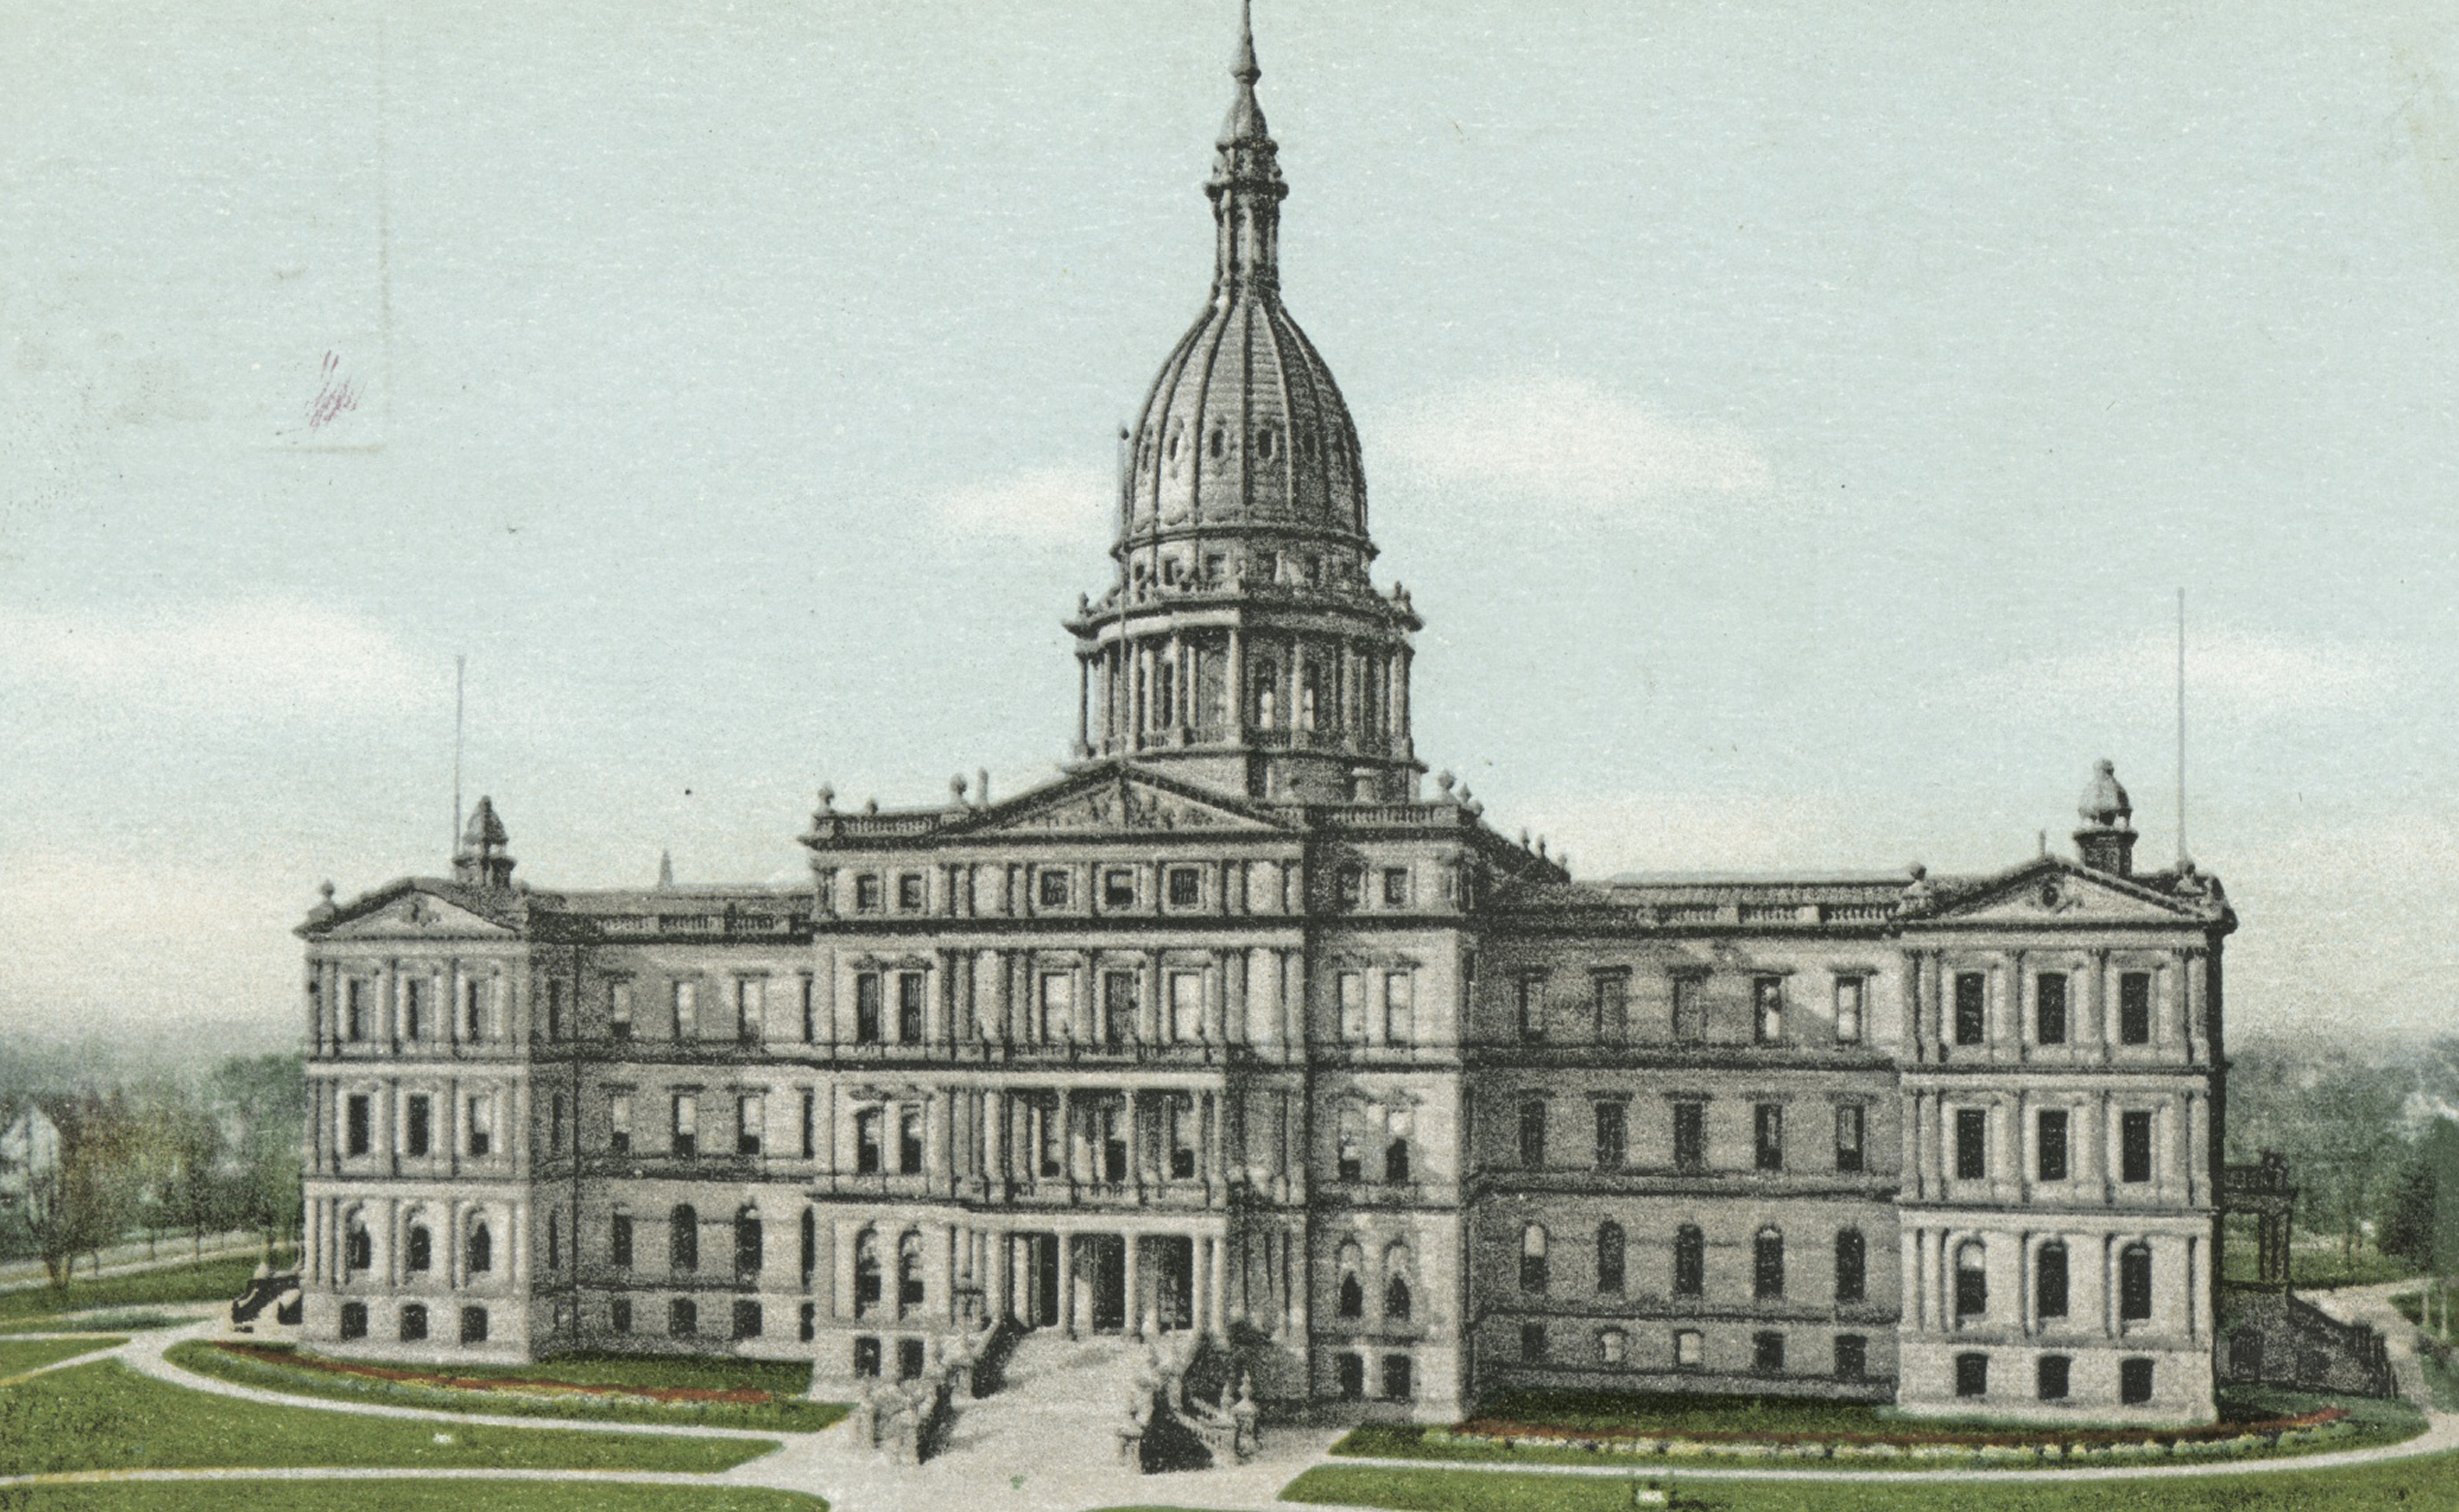 Postcard of the exterior of the Michigan State Capitol building, Lansing, Michigan, 1914. From the New York Public Library. In the 19th century, Michigan was the harbinger of a wave of state laws criminalizing seduction. (Getty Images)